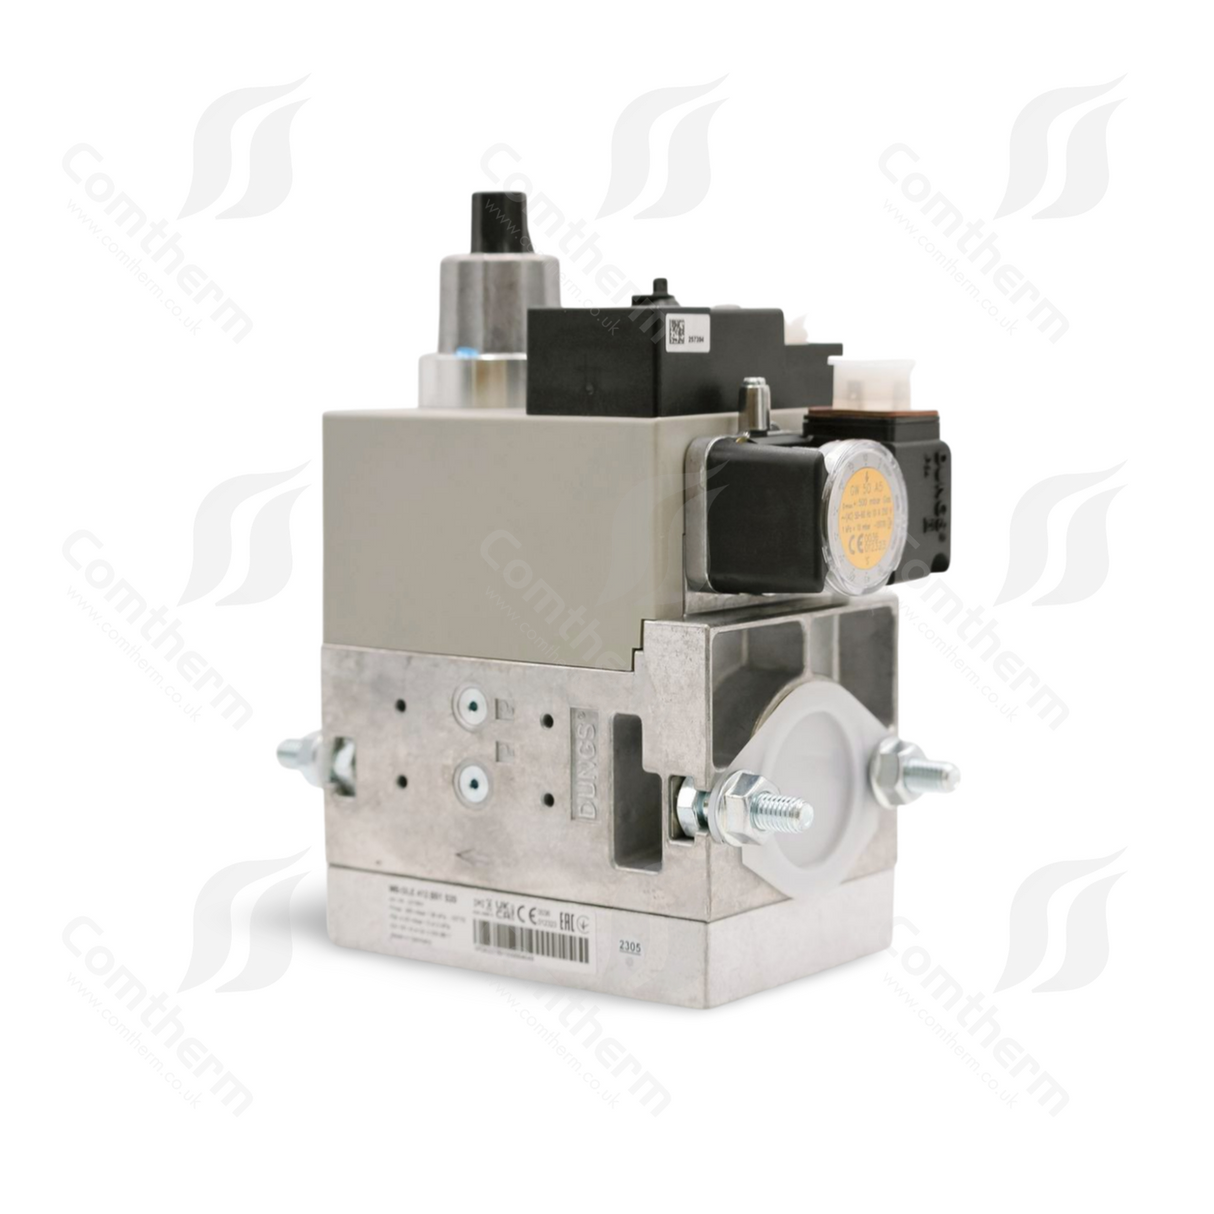 Dungs MB-DLE 412 B01 S20 + GW50A5 Multibloc Gas Valve - 110v